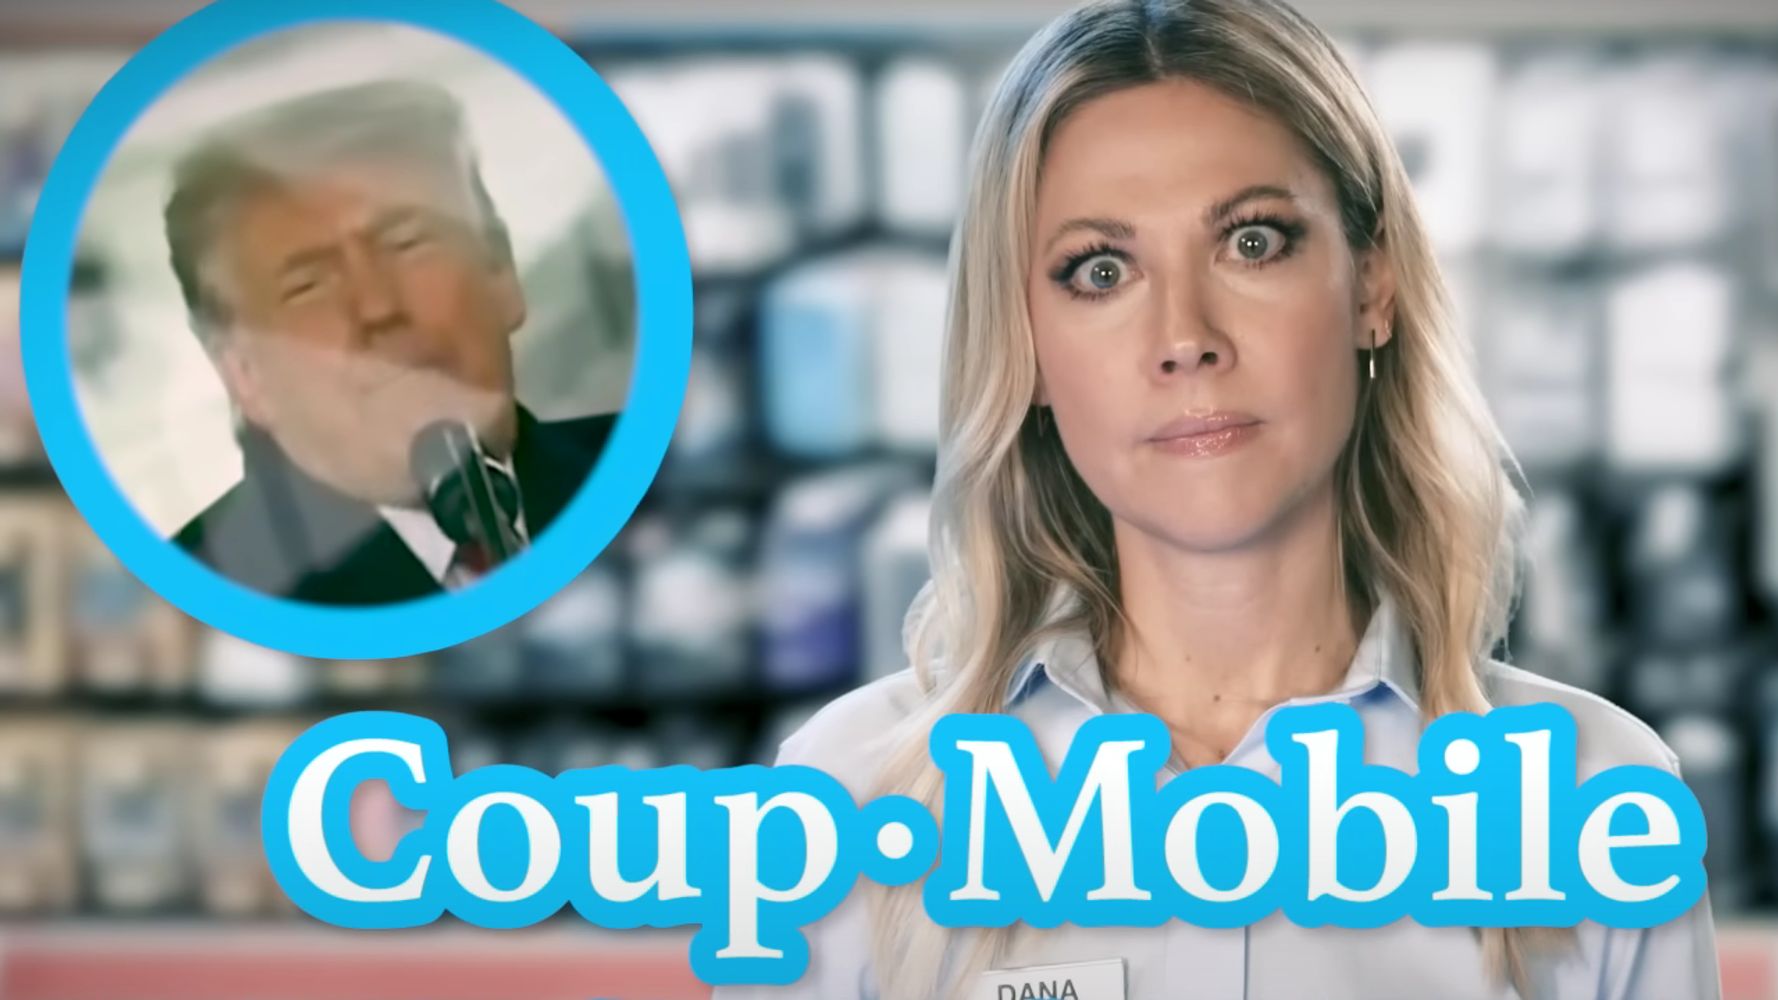 Donald Trump’s Enablers And Supporters Torched In Spoof Cell Phone Carrier Spot